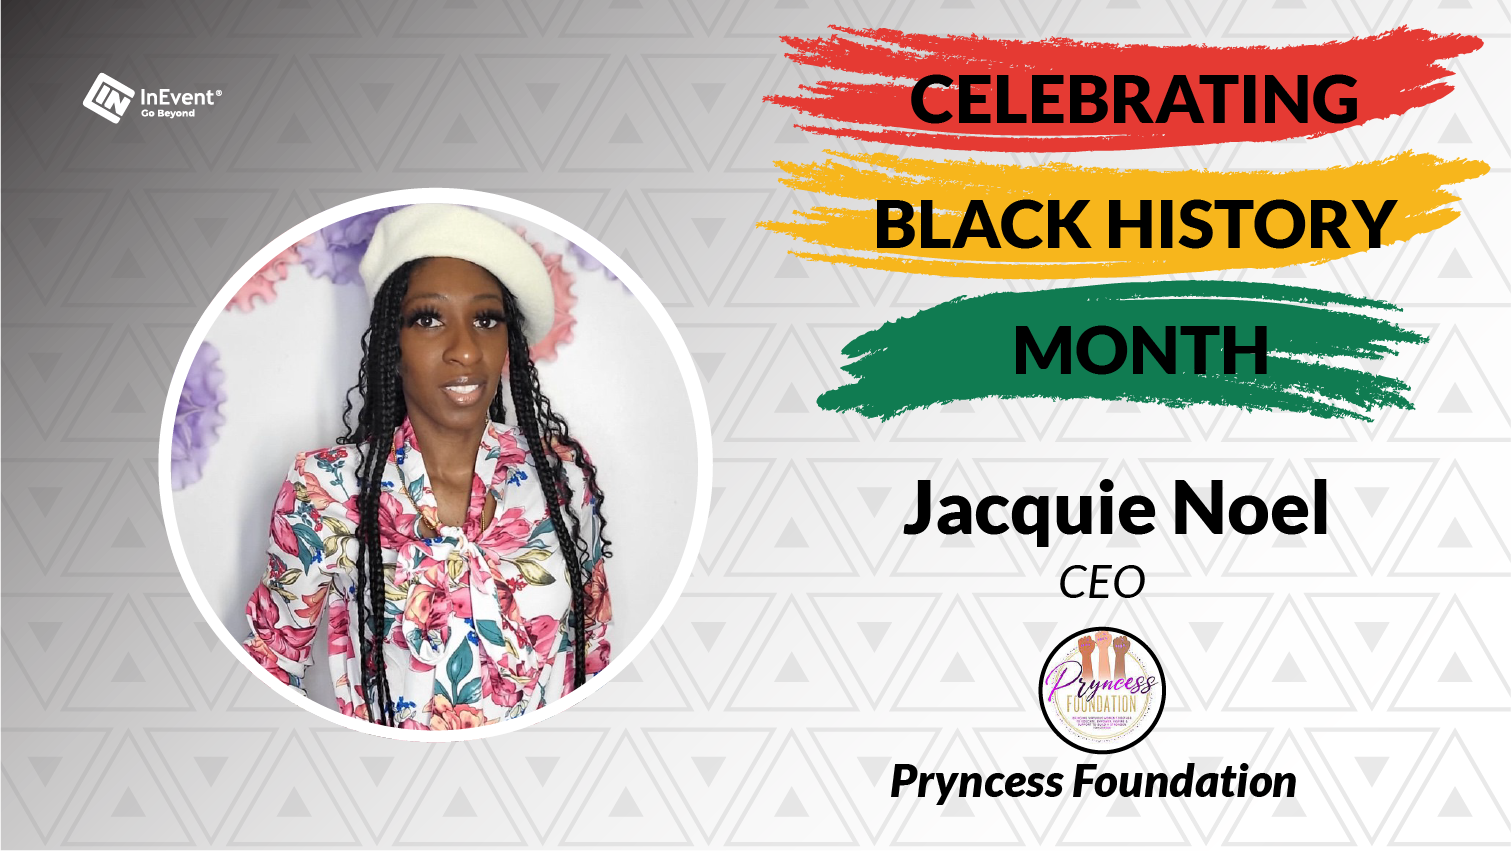 Jacquie Noel - CEO of the Pryncess Foundation